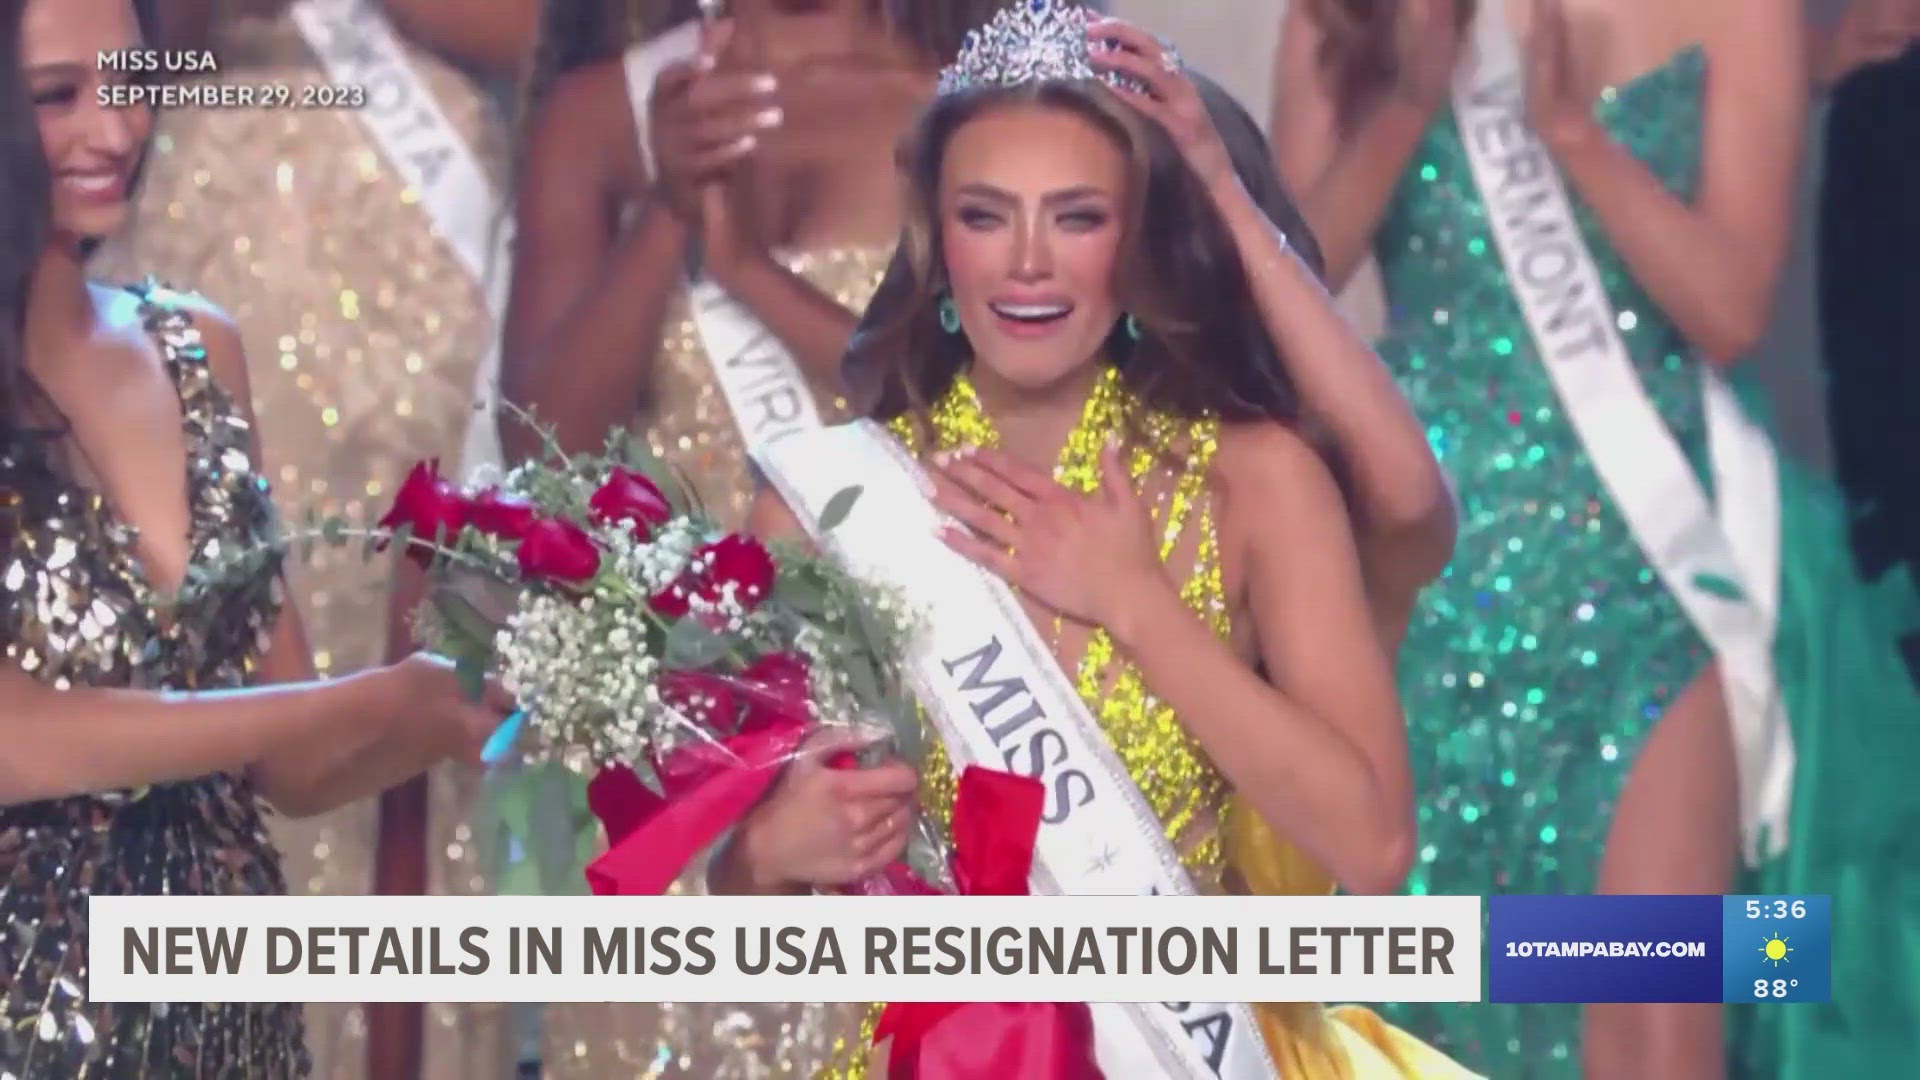 “This is supposed to be a women empowerment organization, but they took that power away,” a source said of the Miss USA organization management.